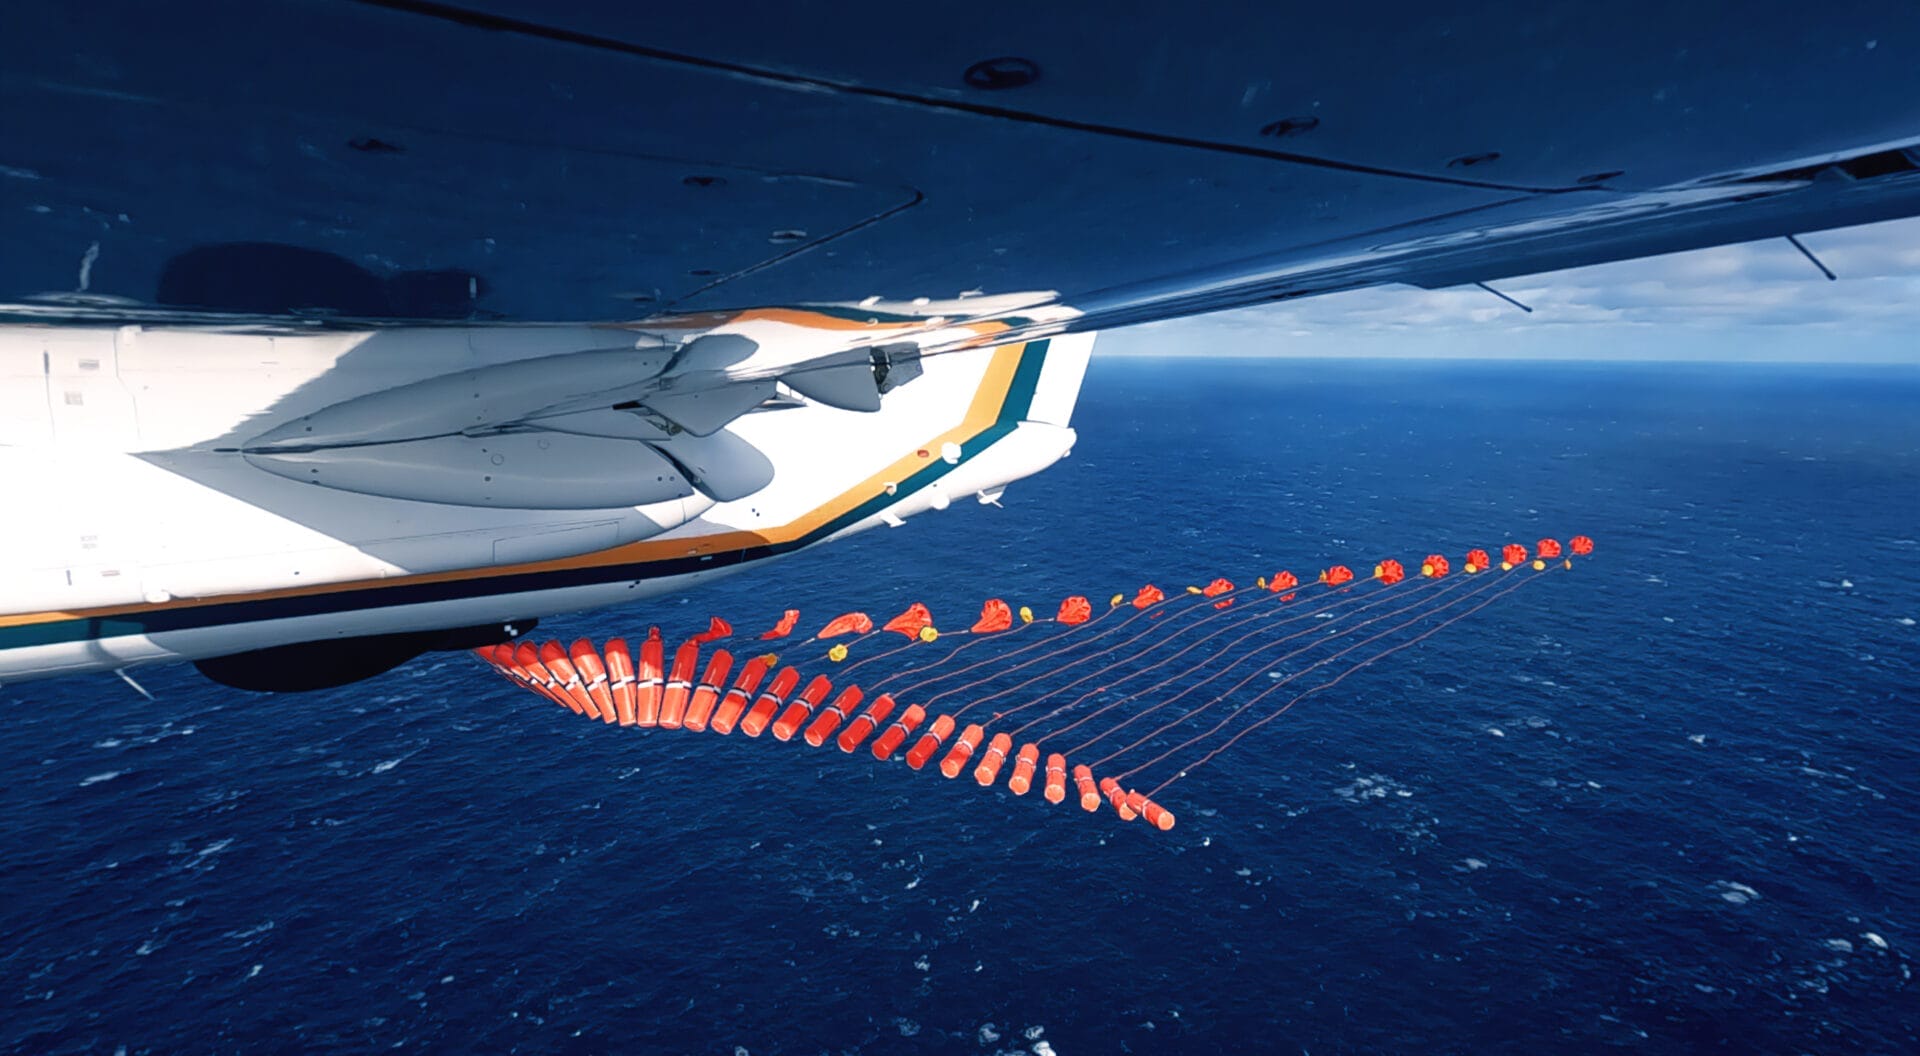 Aircraft dropping test buoy as part of airworthiness testing